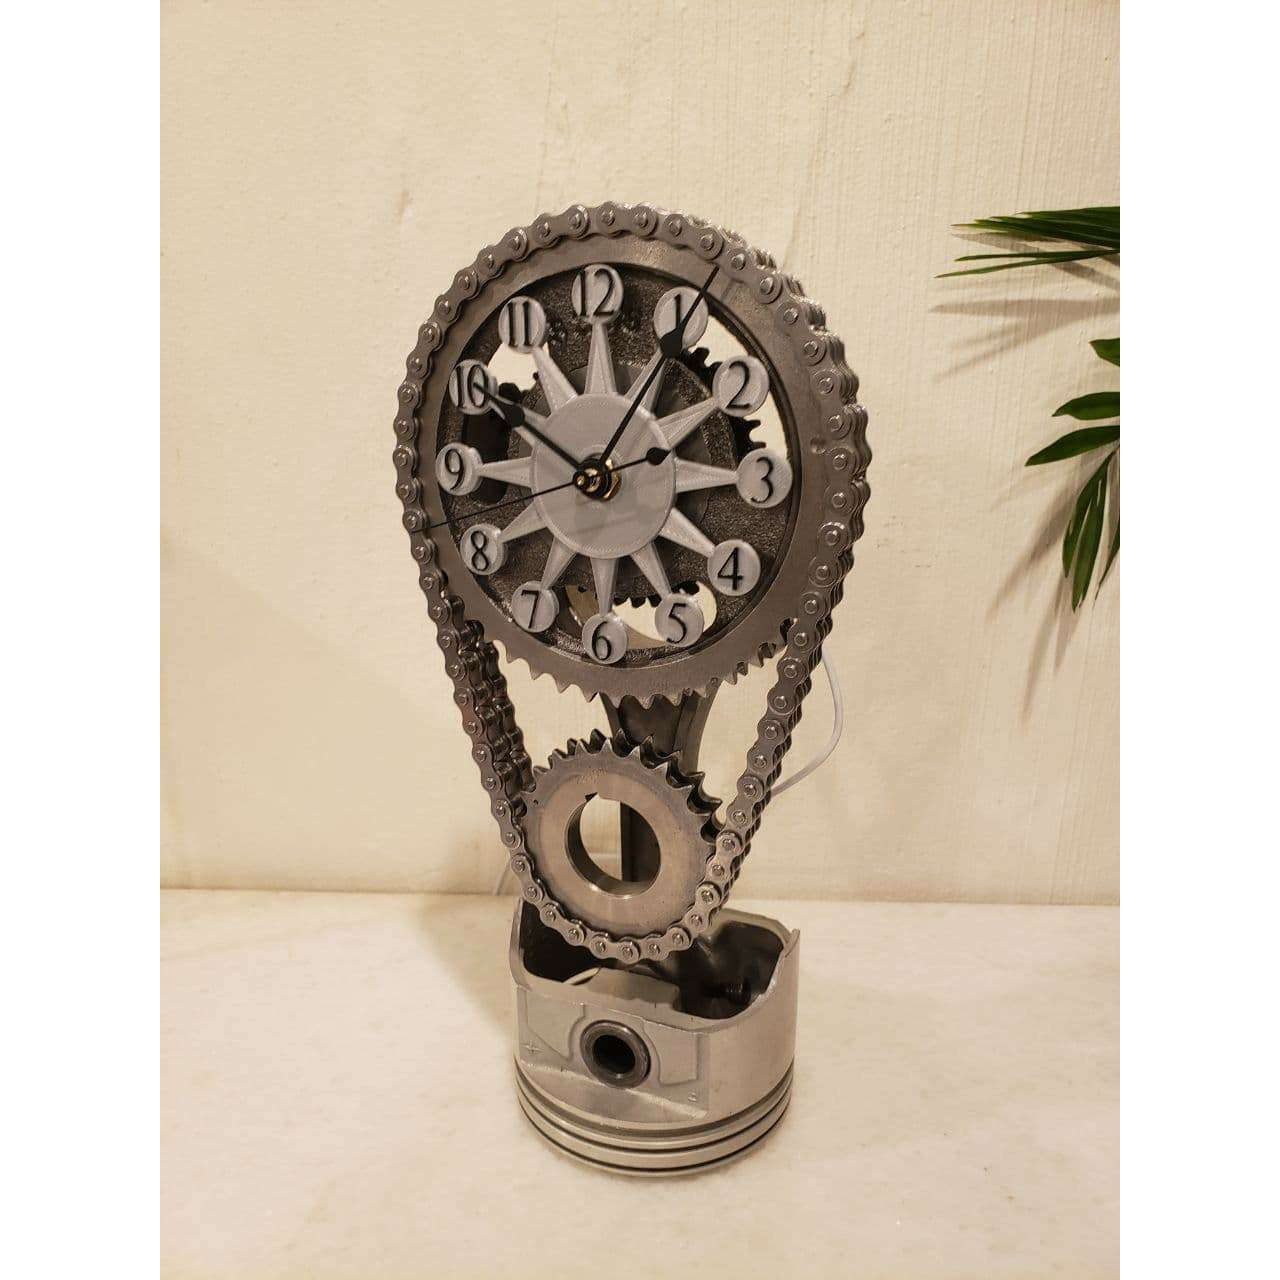 Vintage Clock, Steampunk Clock with Movement Gears Home Decor Rotating Gear  Clock Timing Rotating Gear Clock Craft Ornament Chain Gear Clock Ornament